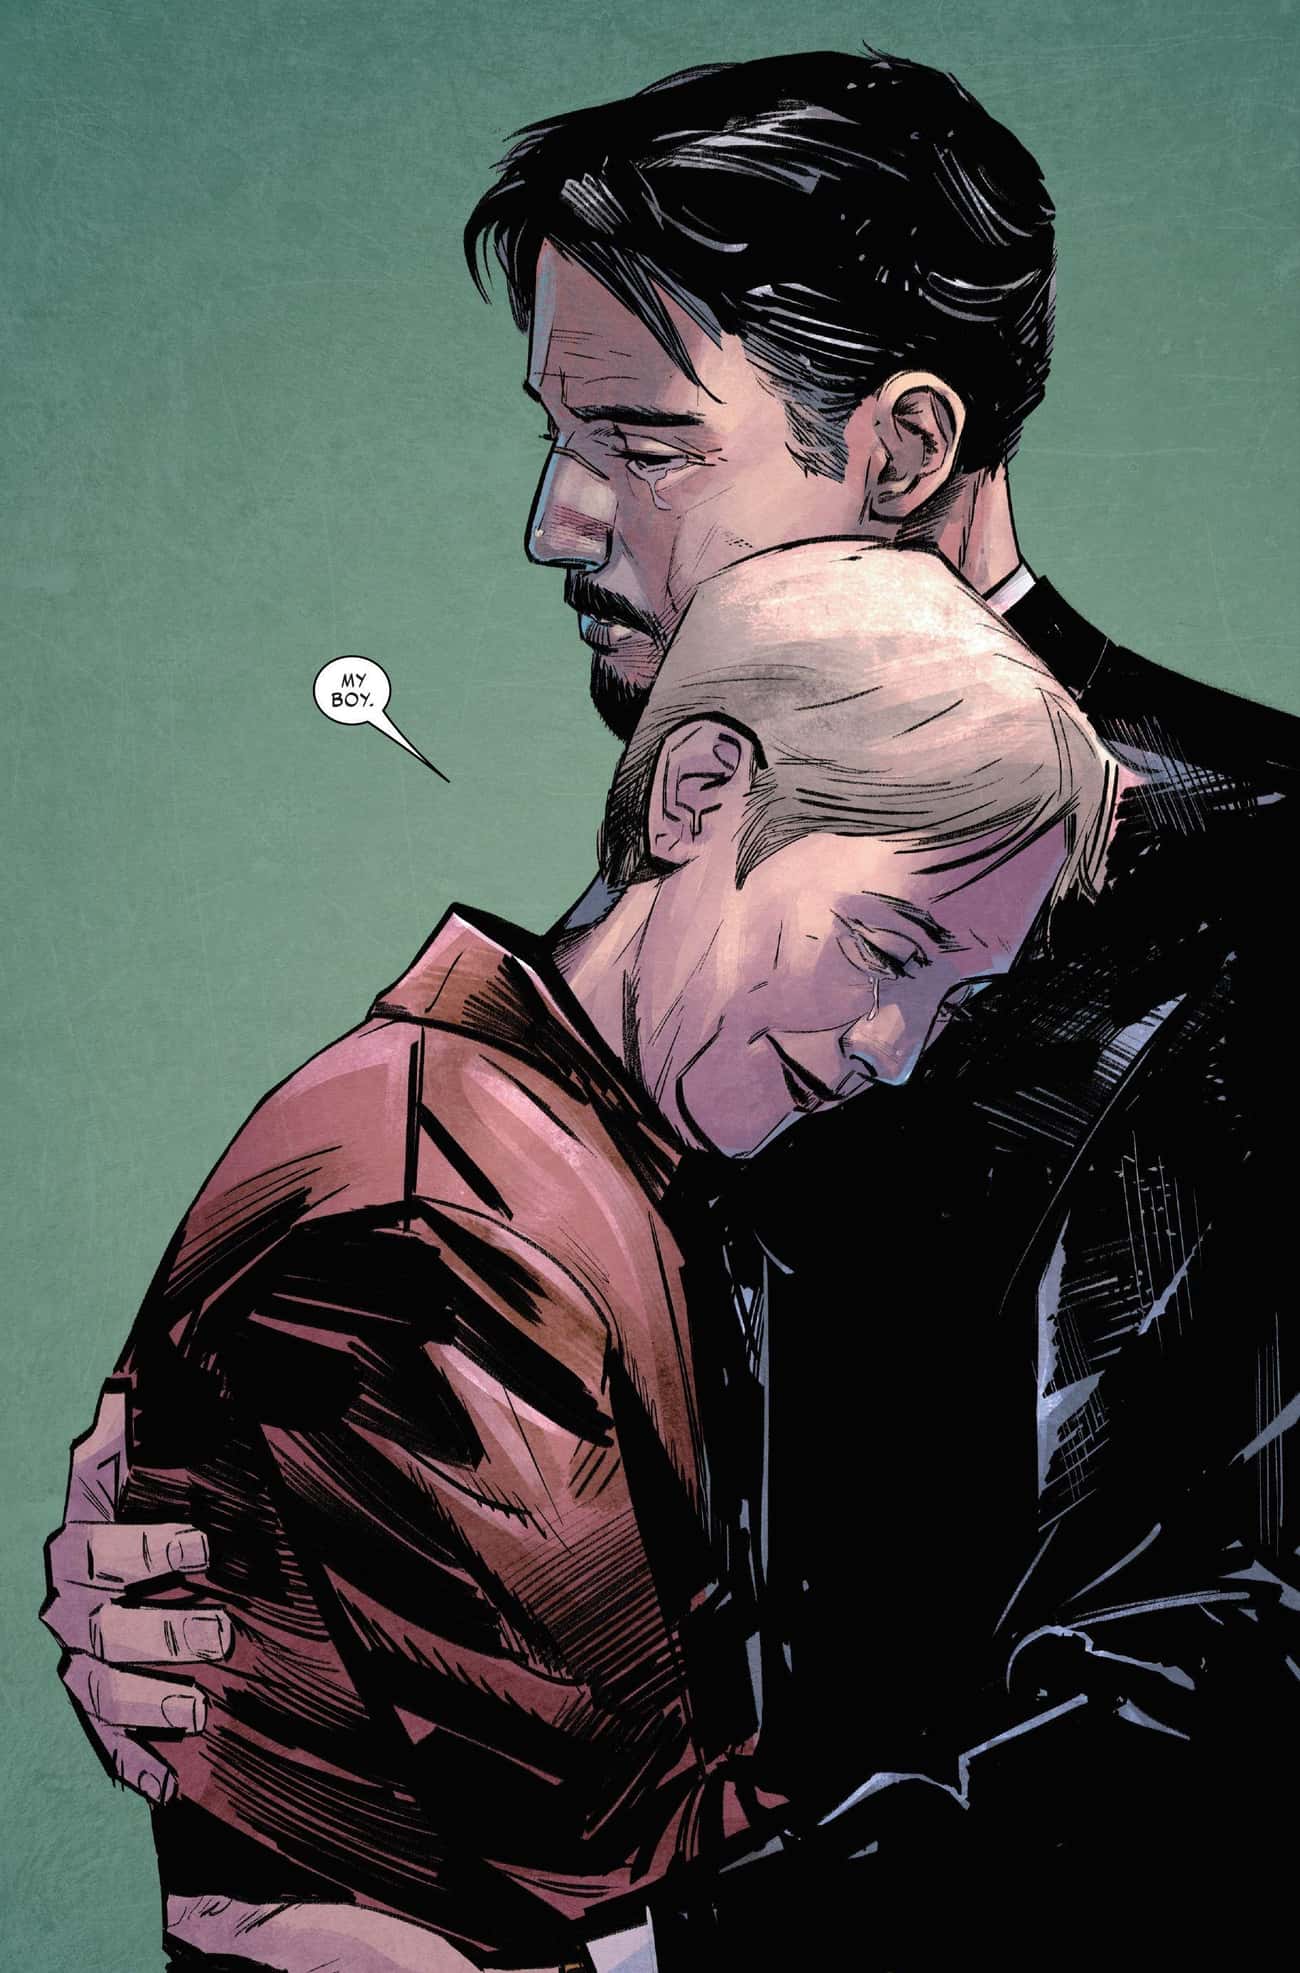 Tony Stark Is Adopted, And His Birth Mother Was An Agent Of S.H.I.E.L.D.